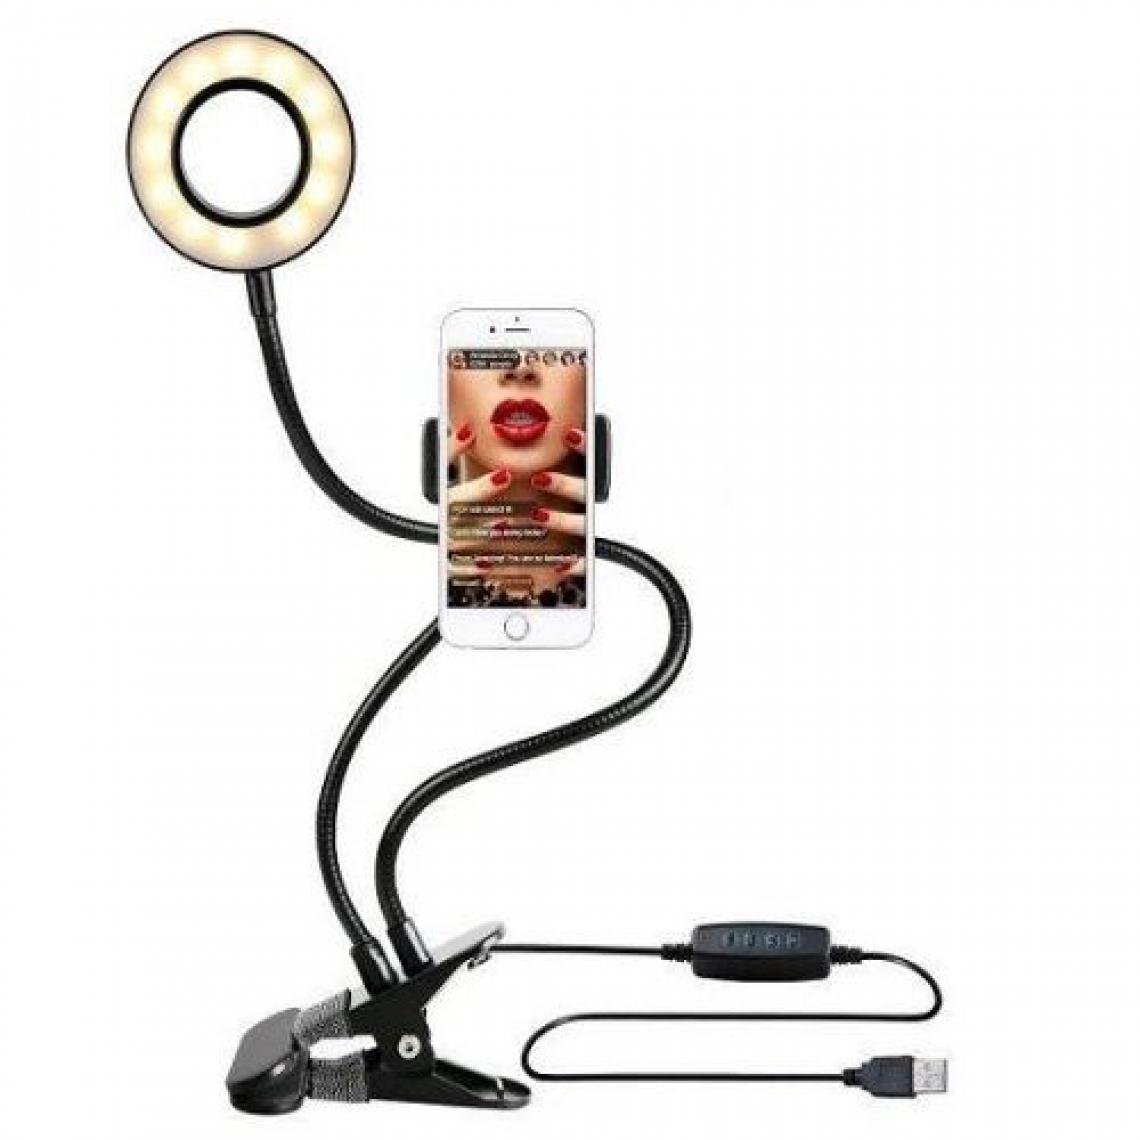 Ozzzo - Stand support bureau selfie led ozzzo noir pour SAMSUNG N9005 Galaxy Note 3 - Station d'accueil smartphone